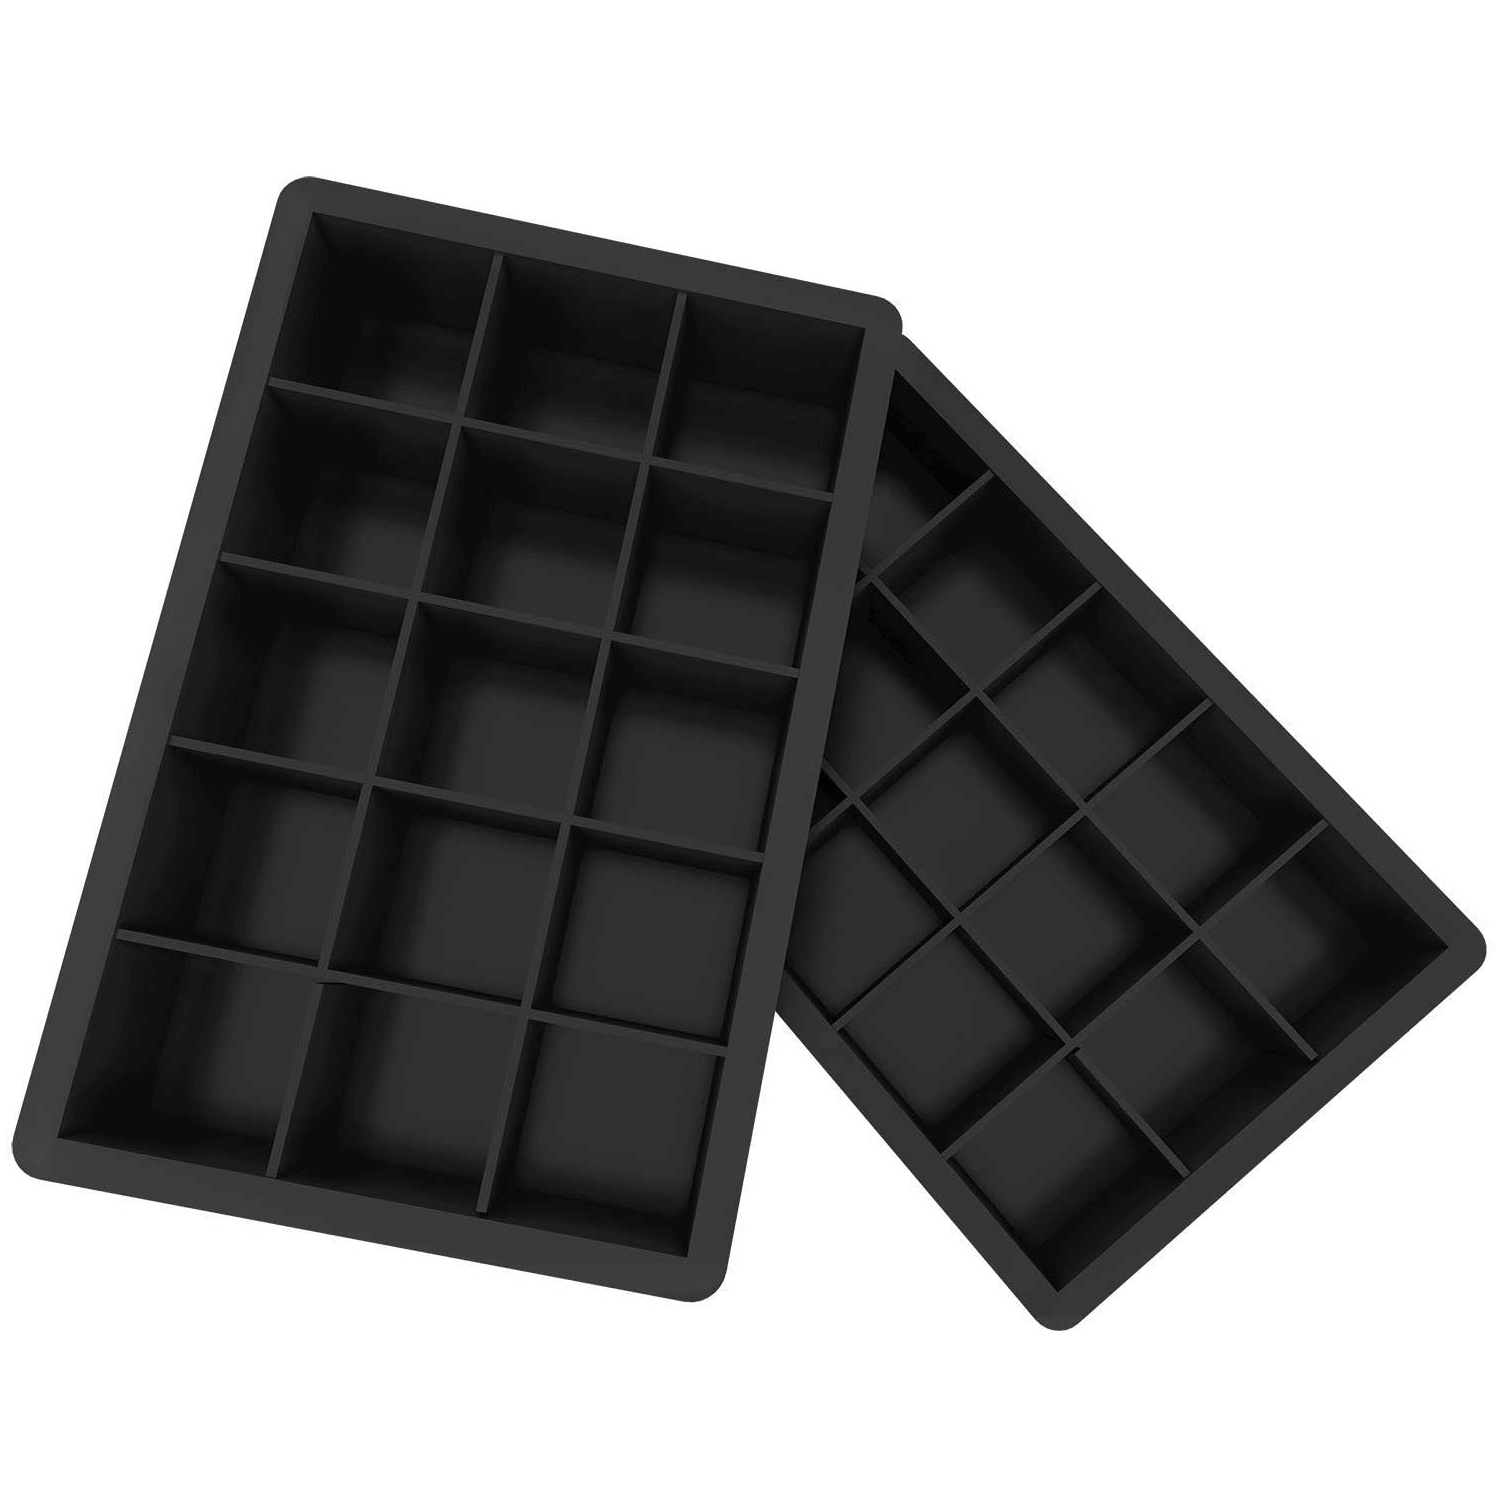 Ice Cube Tray, Large, Pack of 2 - Flexible 8 Cavity Silicone Ice